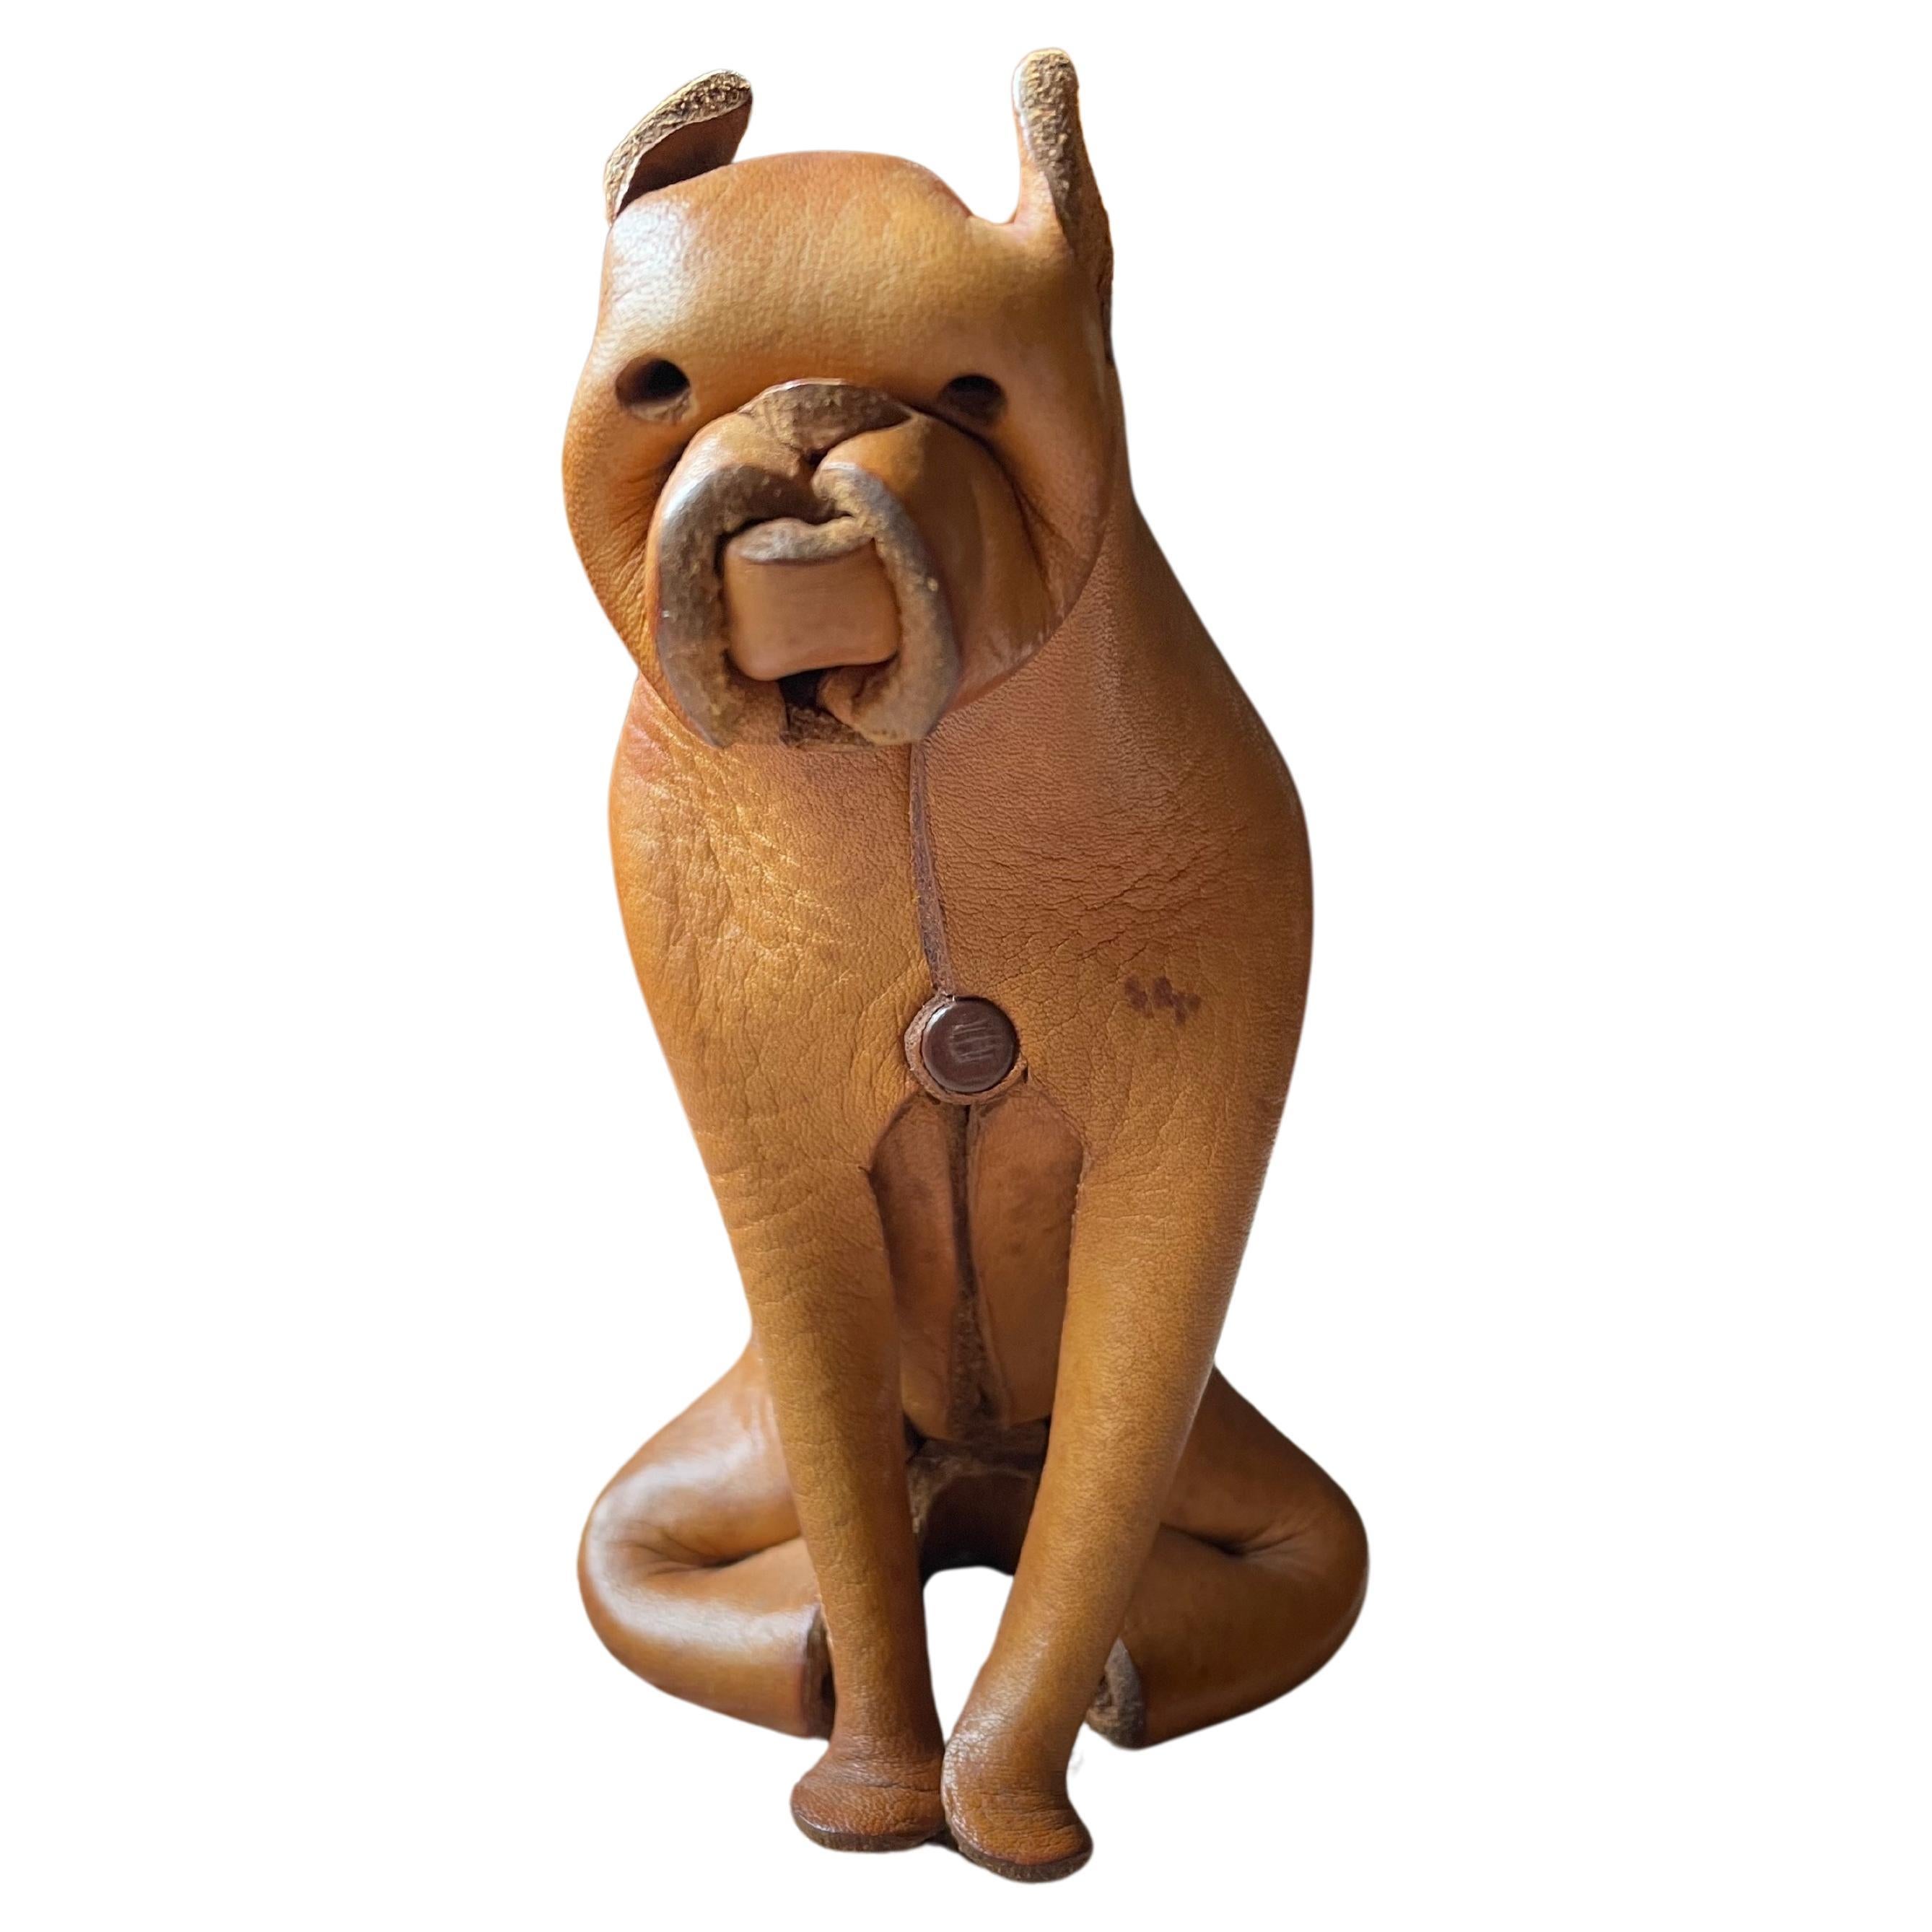 Handmade leather dog/Boxer by DERU, Germany 1960s.